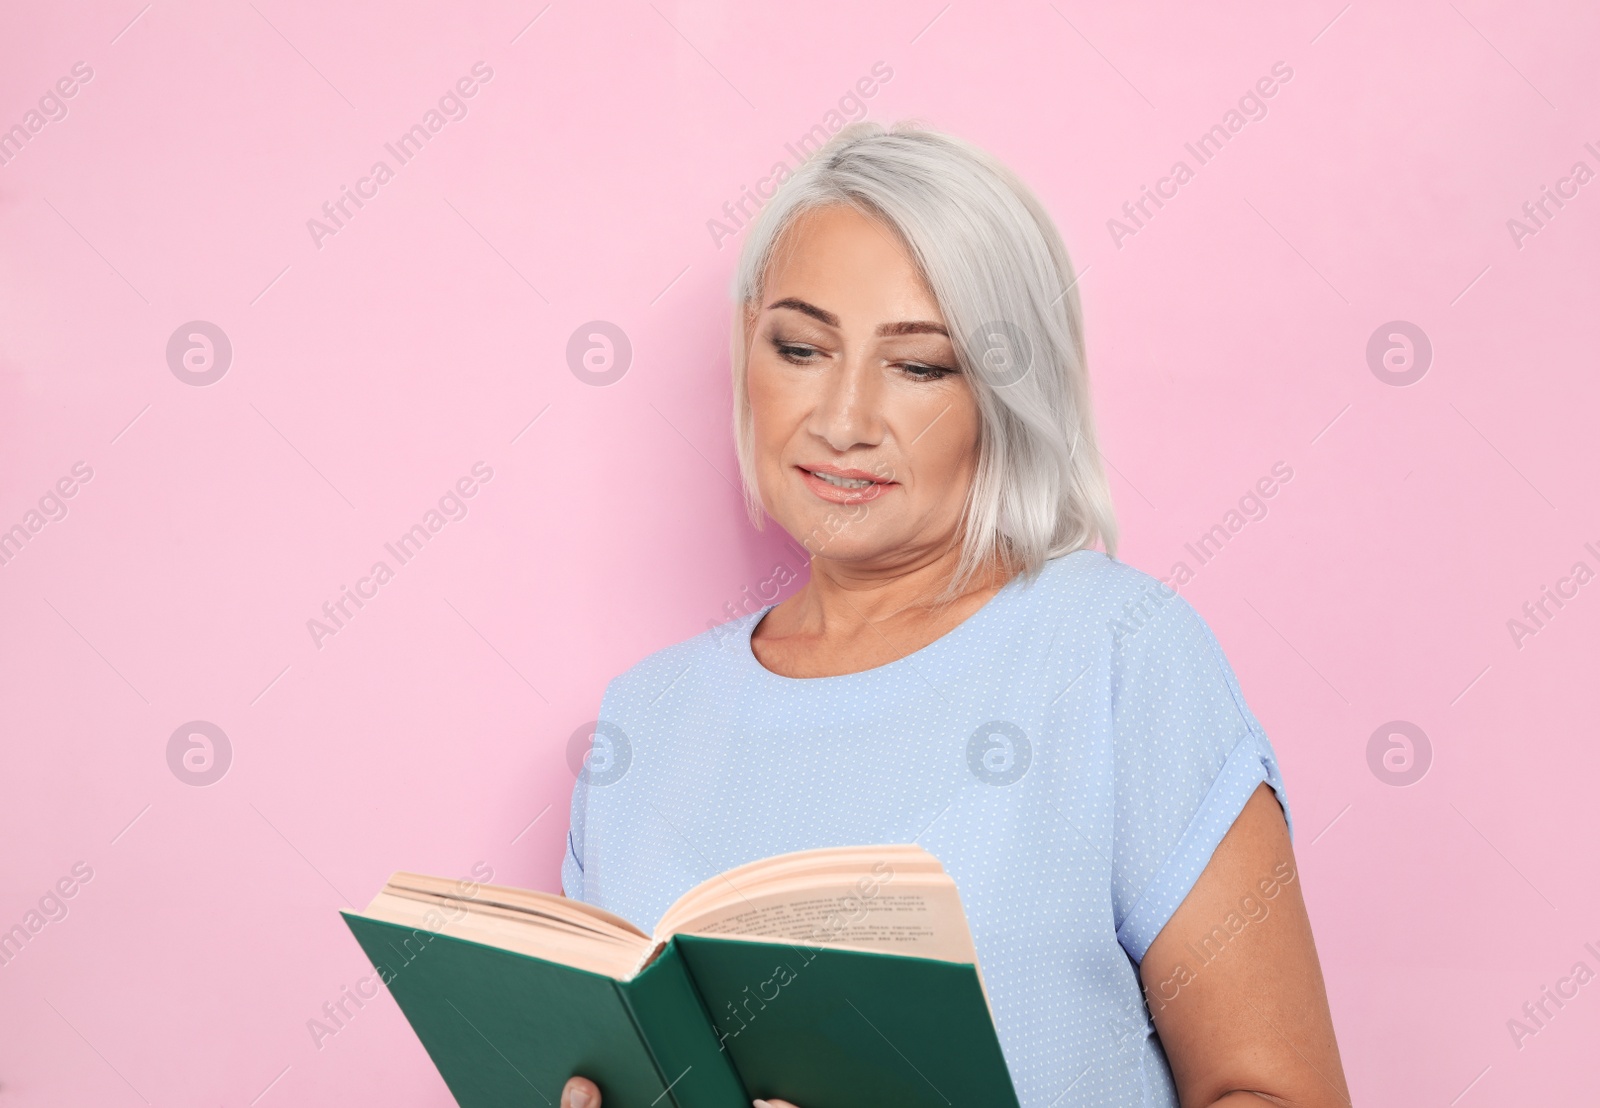 Photo of Mature woman reading book on pink background